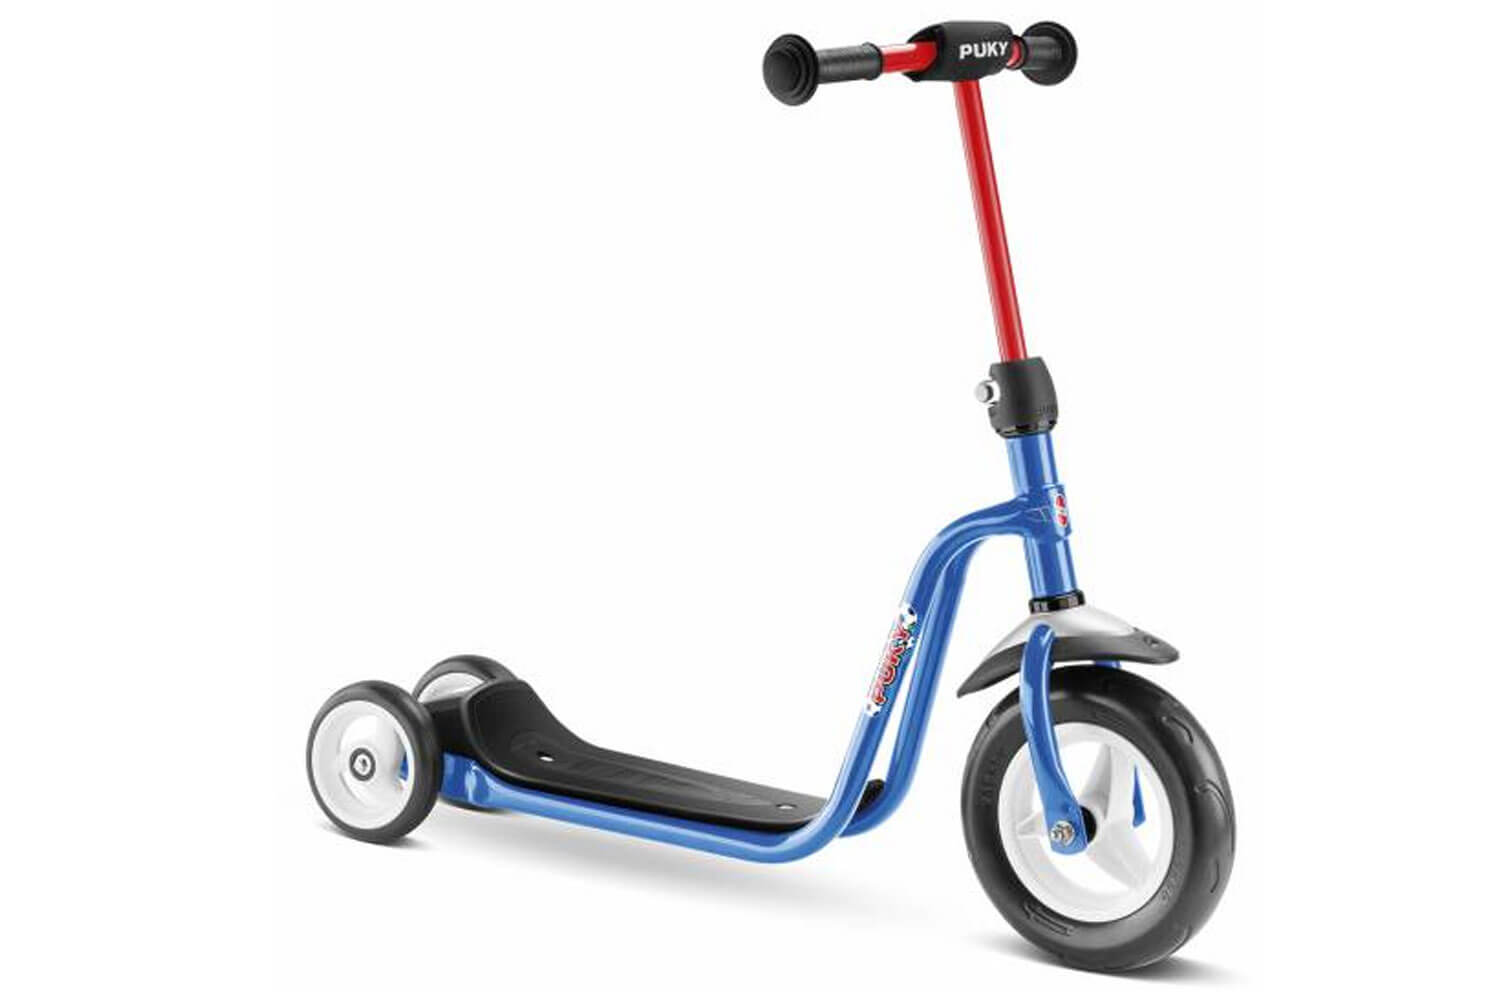 Puky 5176 R 1 Scooter, Himmelblau